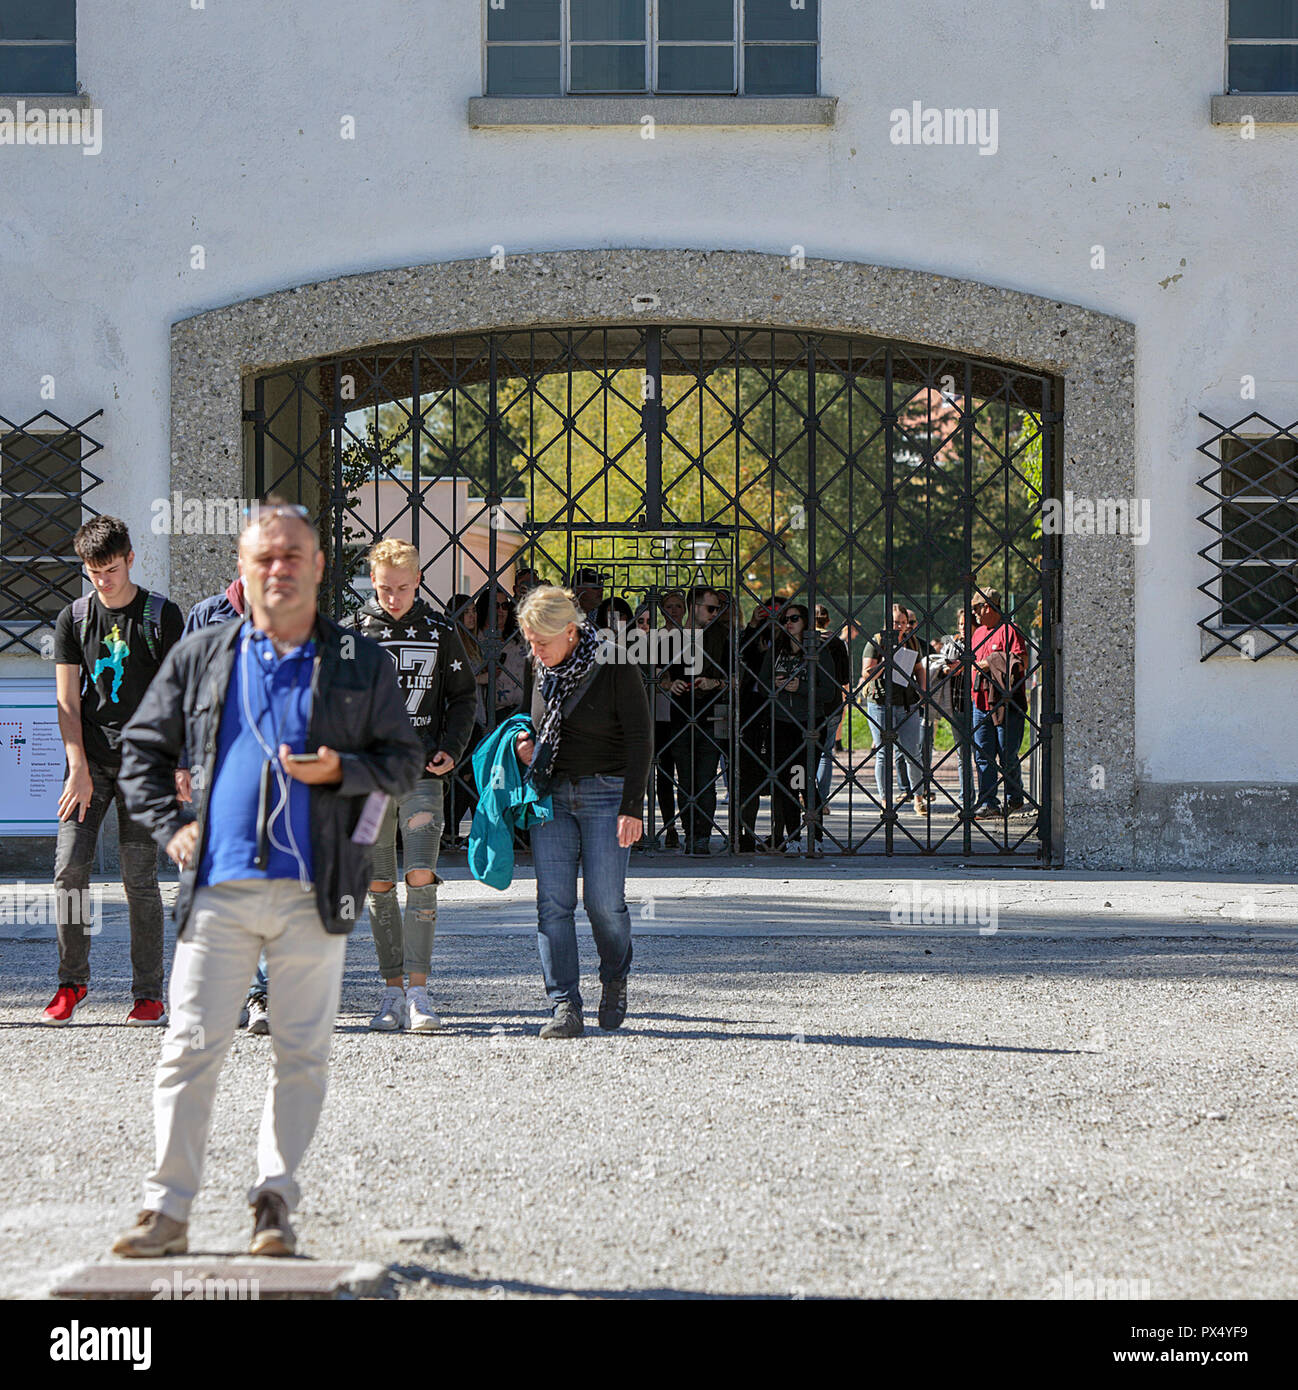 The entrance/exit to Dachau Concentration Camp in Germany with accompanying tourists/visitors. Stock Photo